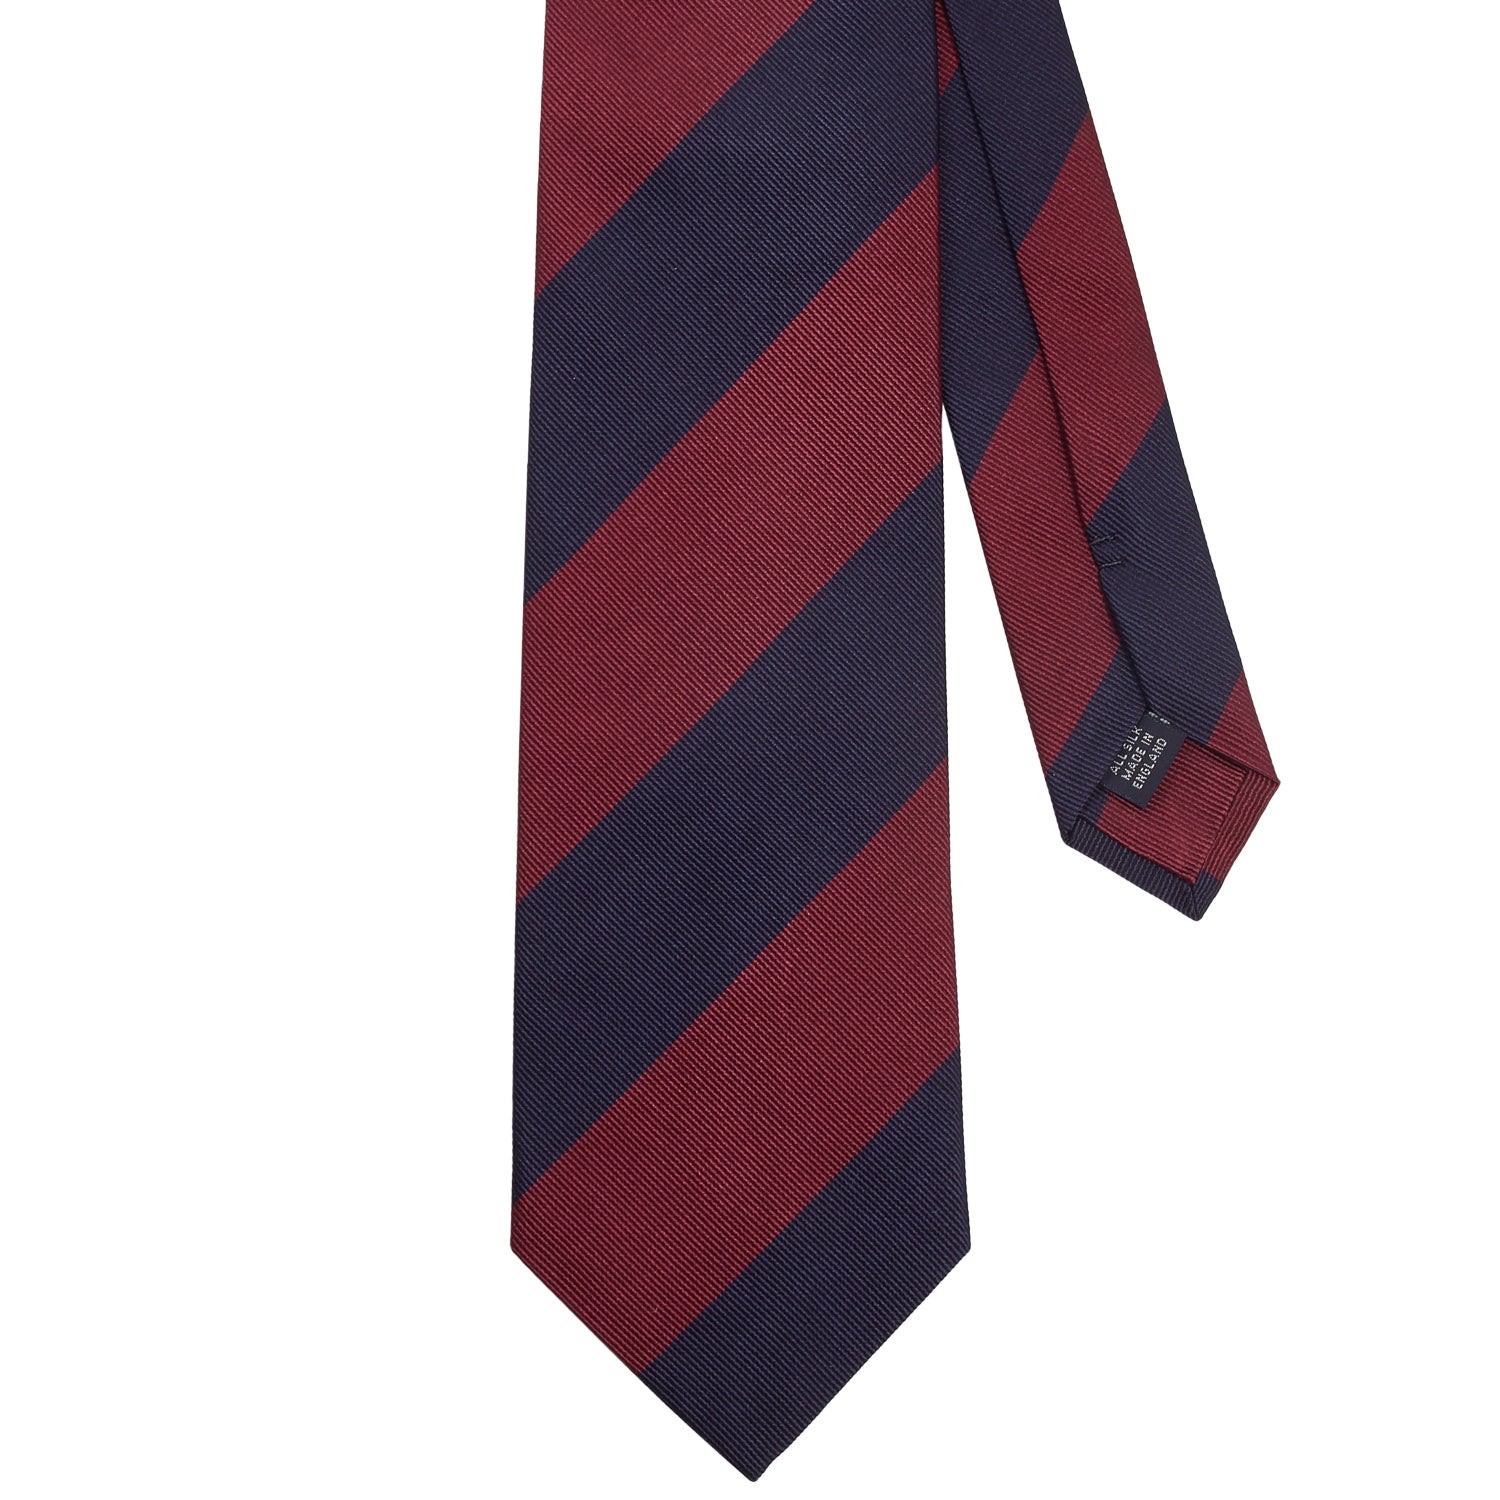 A handmade Sovereign Grade Midnight/Oxblood Household Guards (Blues and Royals) tie in burgundy and navy stripes on a white background by KirbyAllison.com.